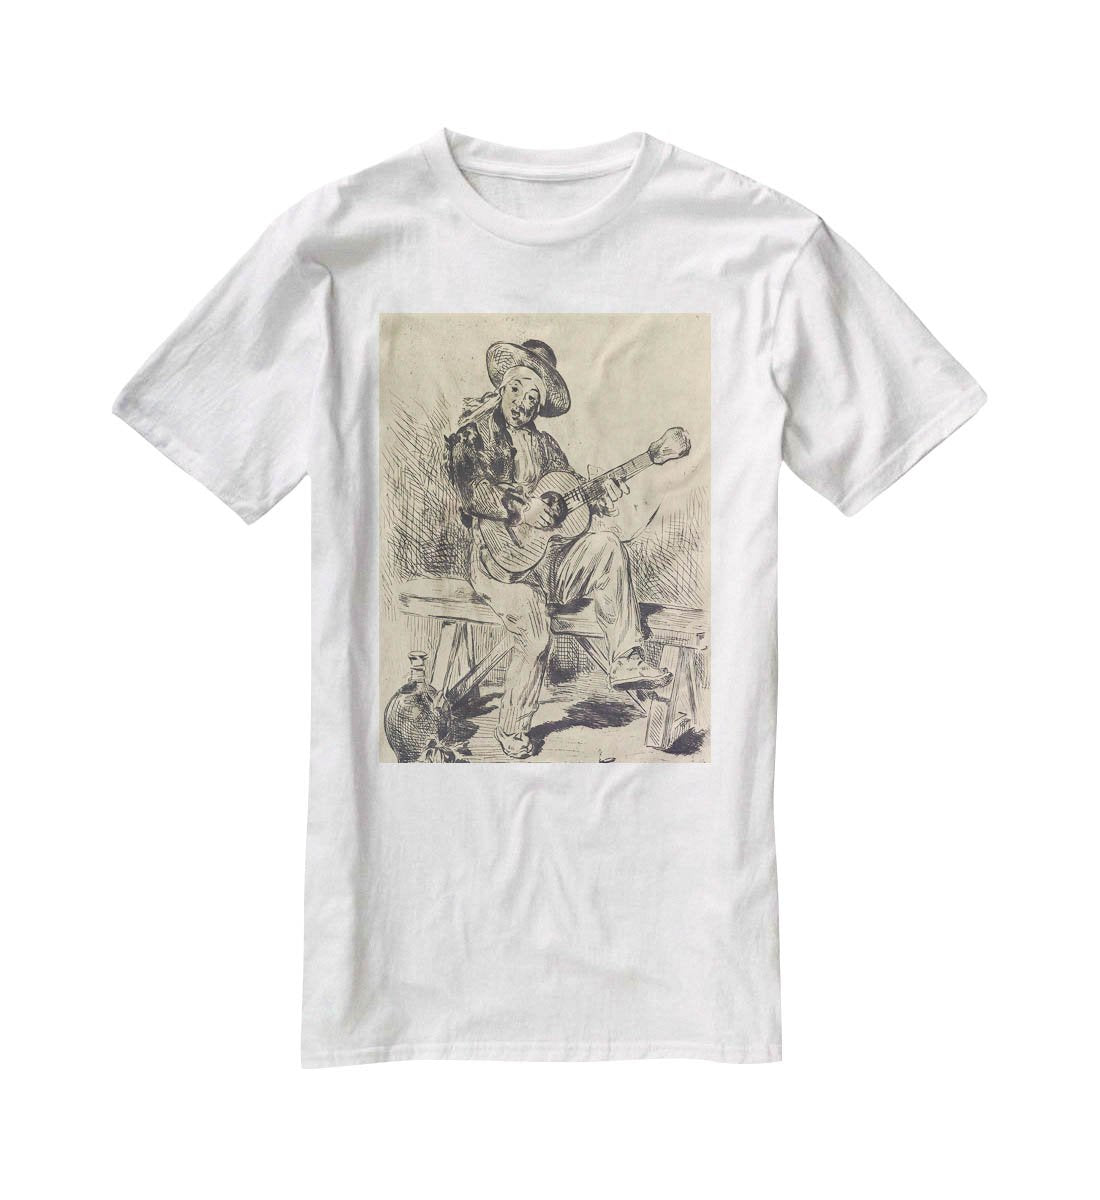 The guitar Player by Manet T-Shirt - Canvas Art Rocks - 5